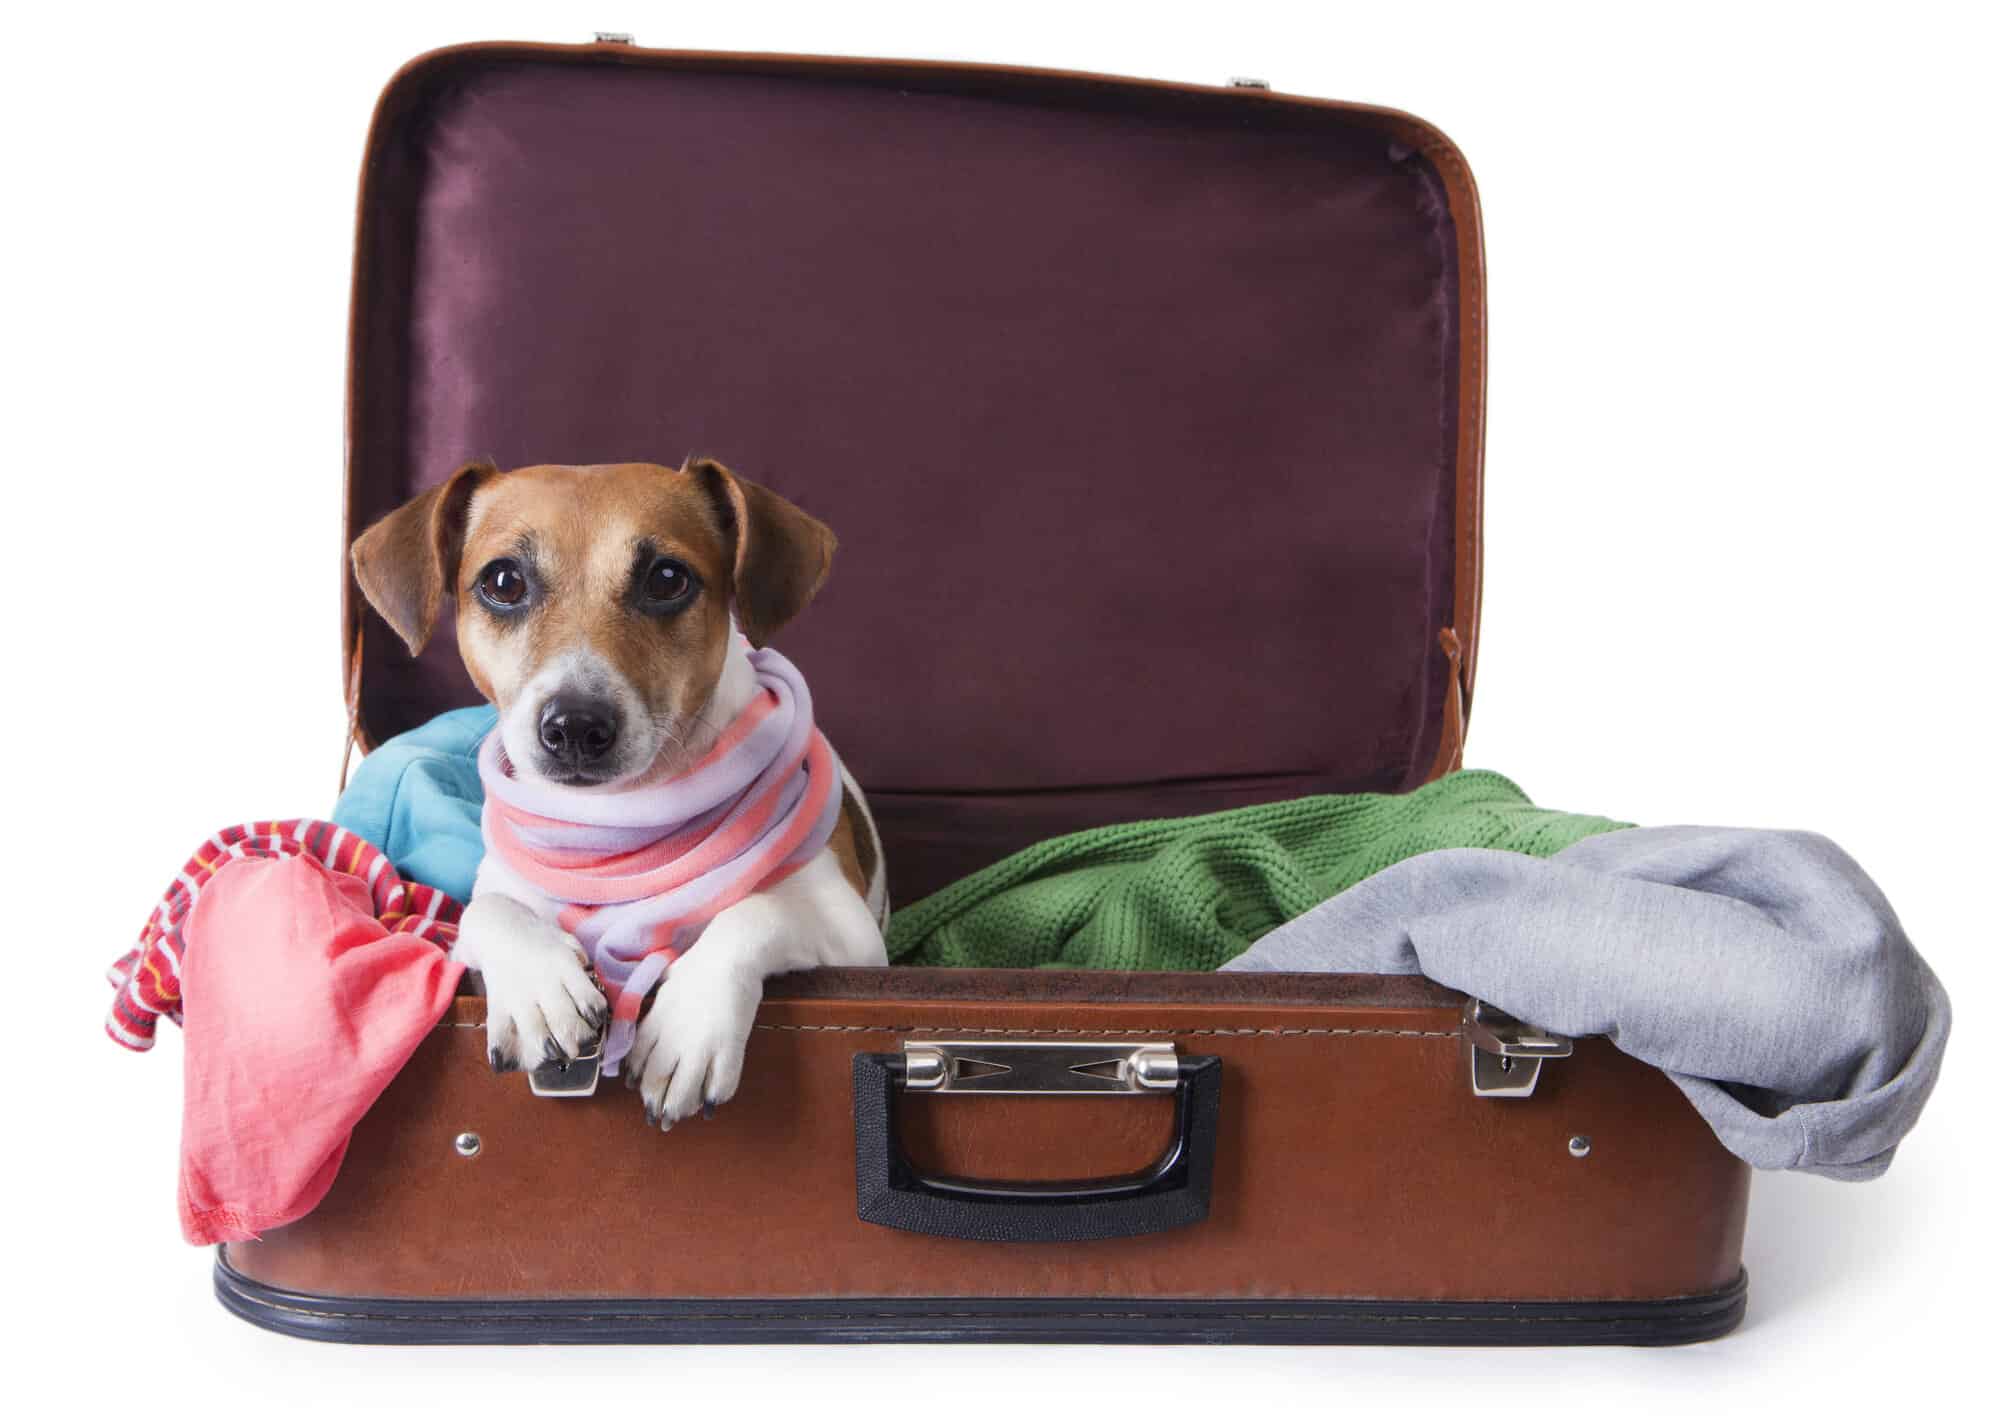 A small dog sitting in a brown leather suitcase alongside clothes.